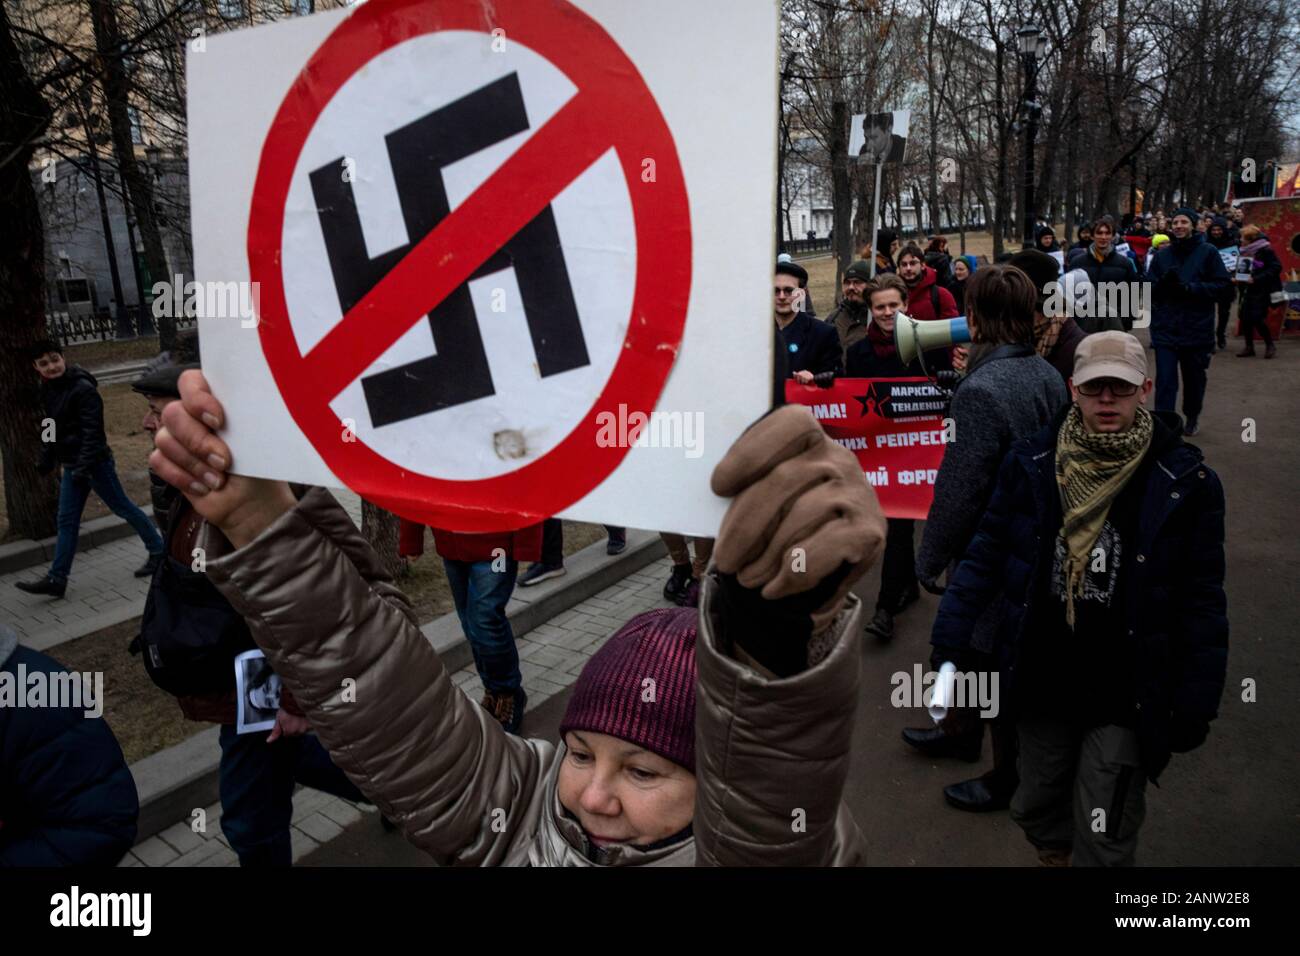 Moscow, Russia. 19th of January, 2020 People take part in a march in memory of lawyer Stanislav Markelov and journalist Anastasia Baburova in Tverskoy Boulevard in central Moscow, Russia Stock Photo